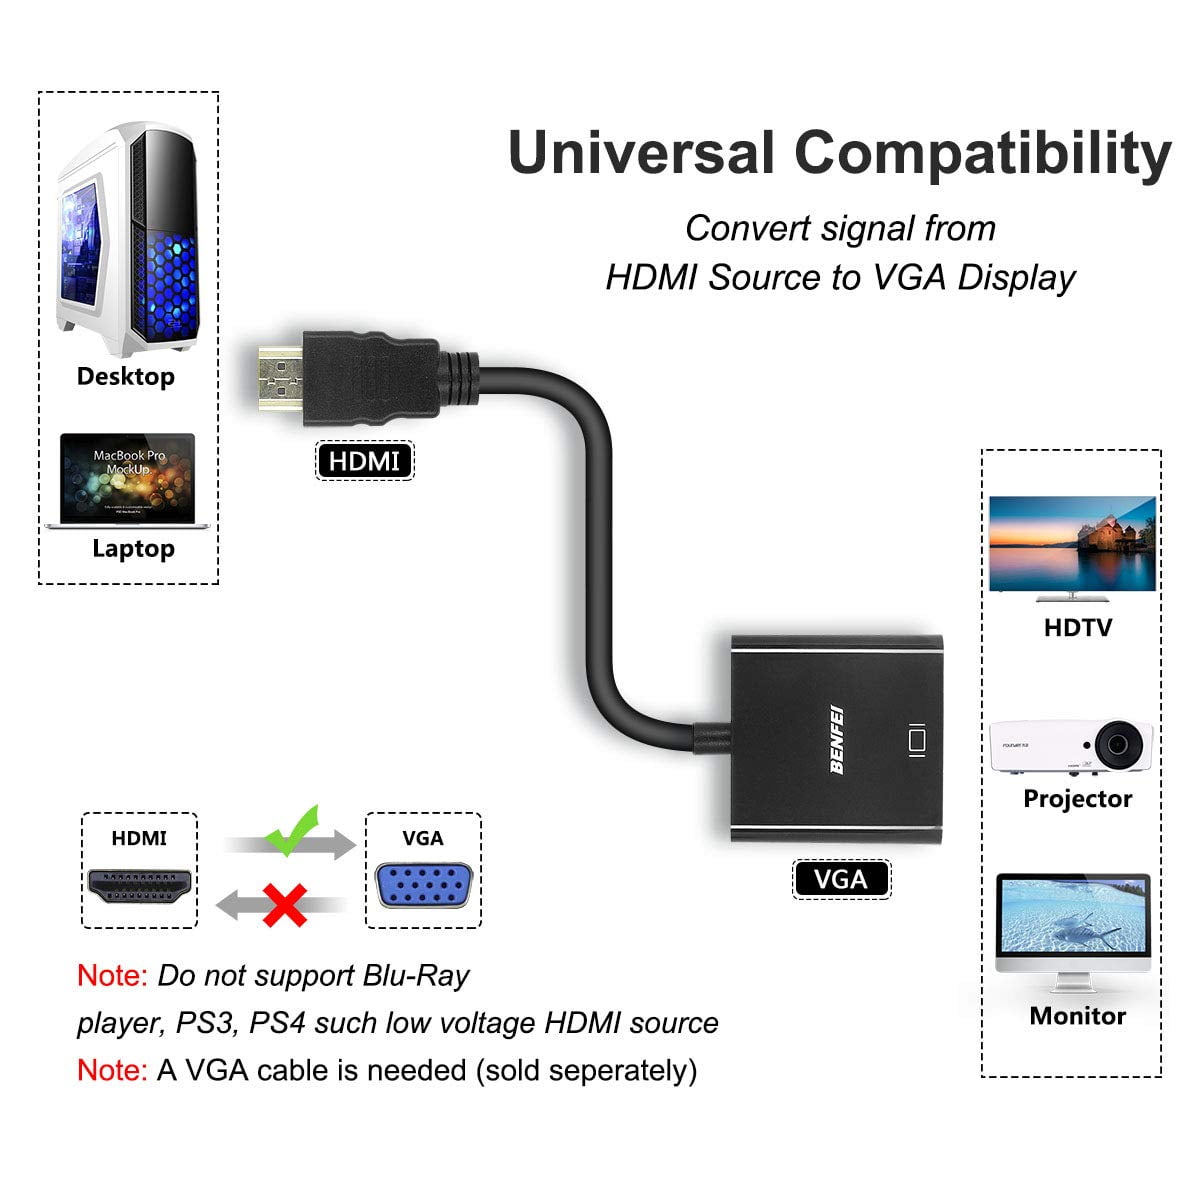 Monitor PC Roku Chromebook Black Raspberry Pi HDTV Laptop Projector Desktop HDMI to VGA 2 Pack for Computer Benfei Gold-Plated HDMI to VGA Adapter Xbox and More Male to Female 